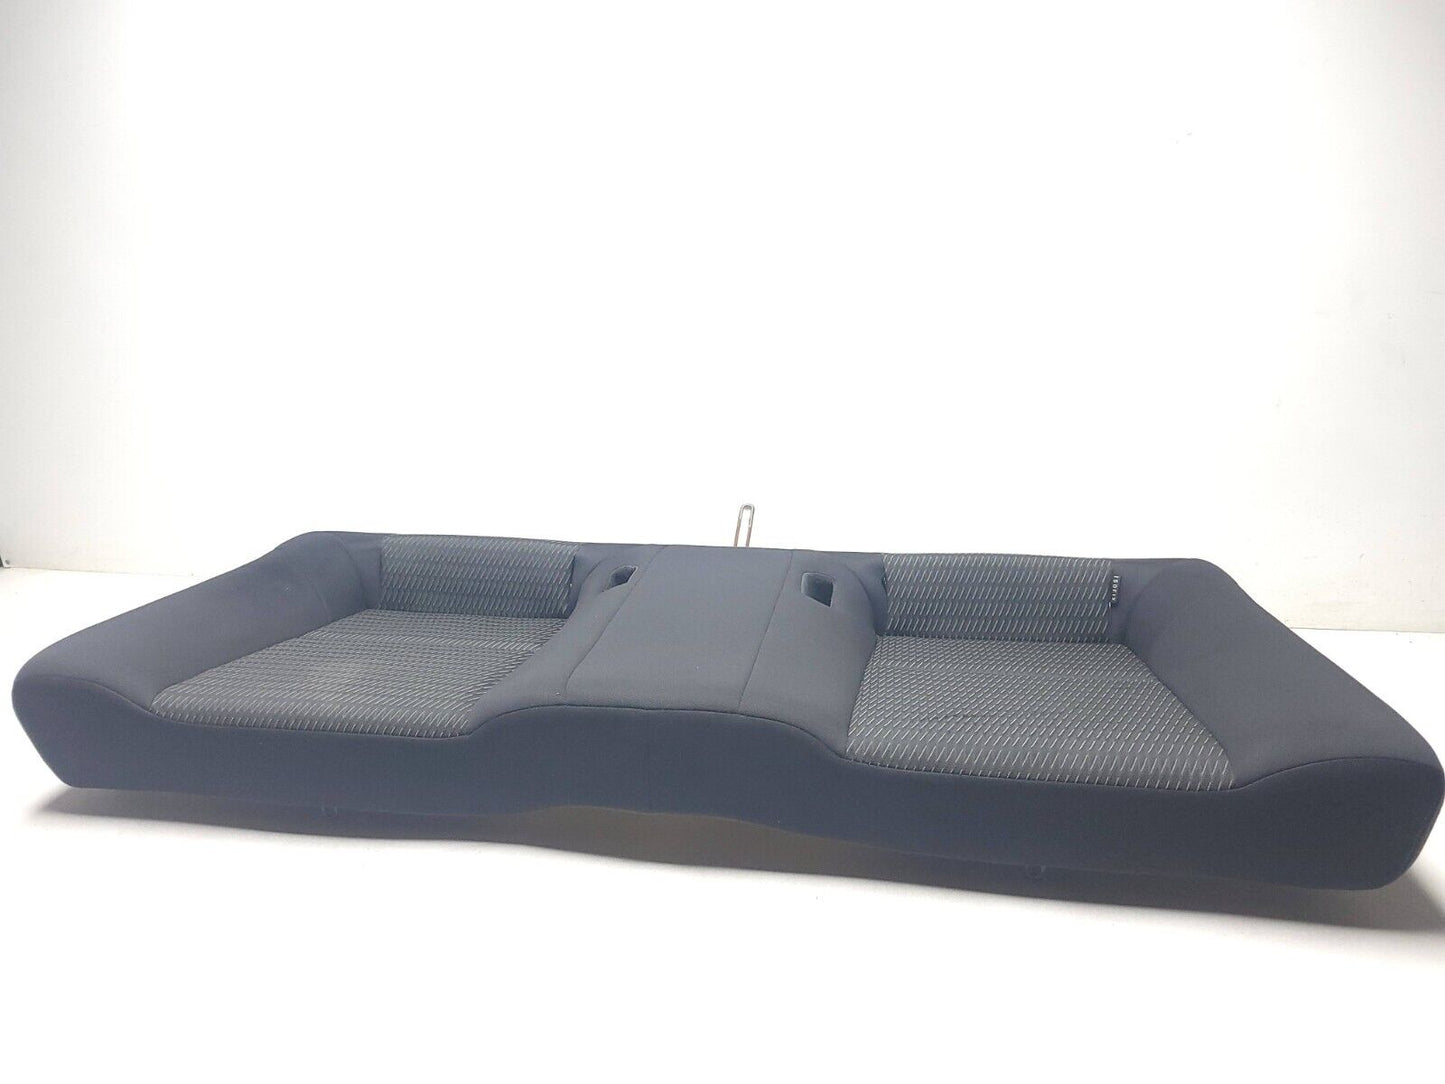 2013-2016 Genesis Coupe Rear Seat Lower Cushion Bench OEM